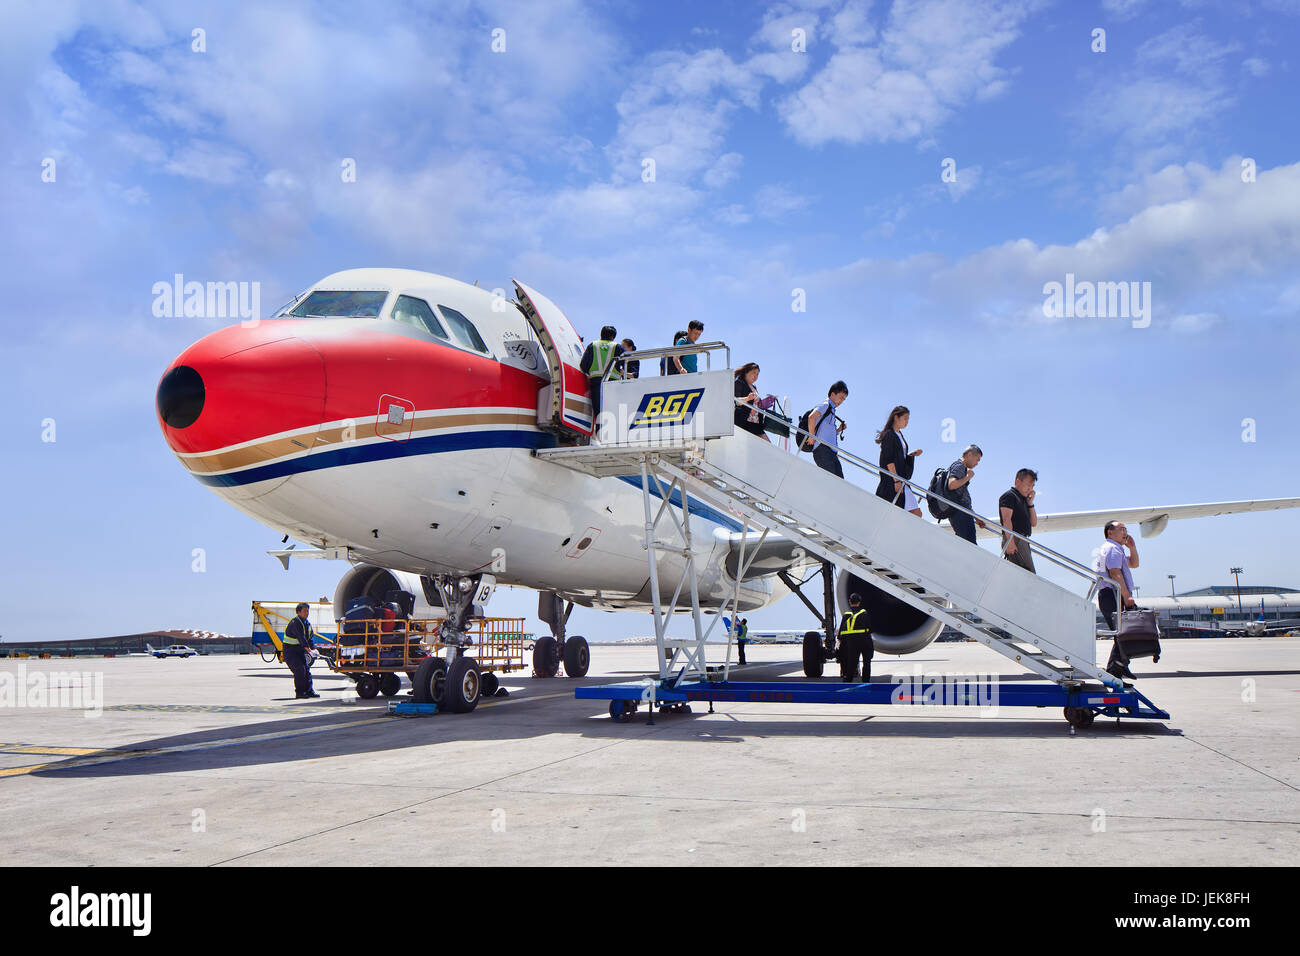 BEIJING-MAY 27, 2014. Passengers come out airplane on Beijing Airport. China's economy is now the world's second biggest. Stock Photo